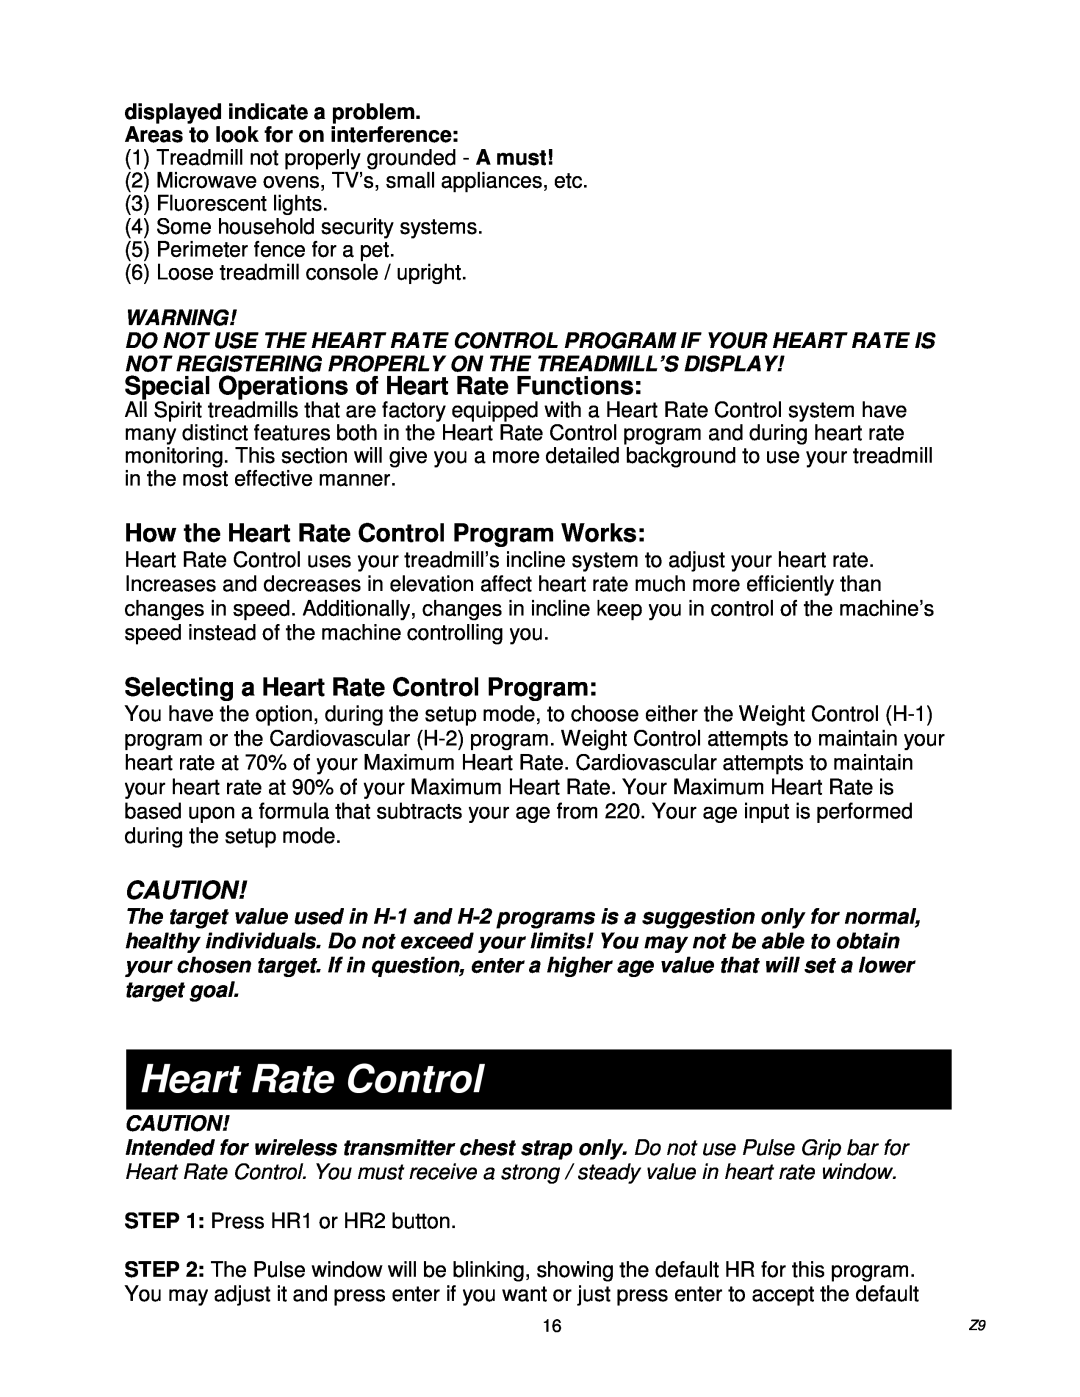 Spirit Z9 owner manual Special Operations of Heart Rate Functions, How the Heart Rate Control Program Works 